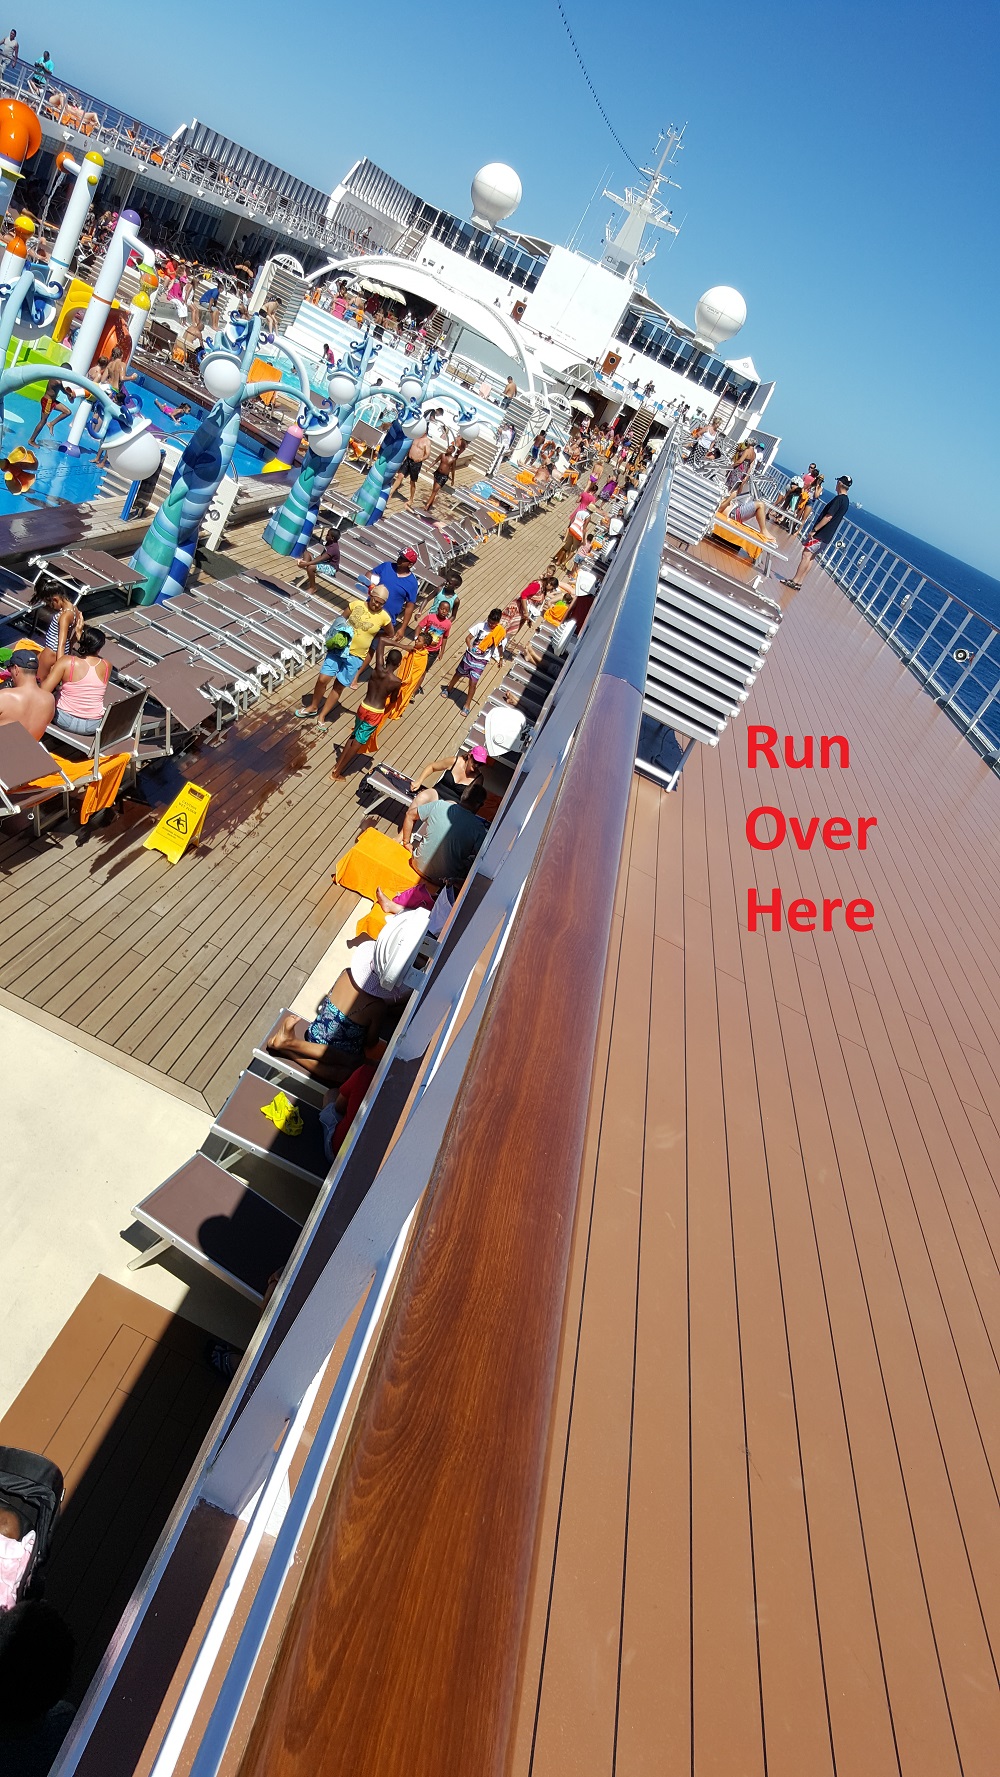 MSC Sinfonia's not so well demarcated running track